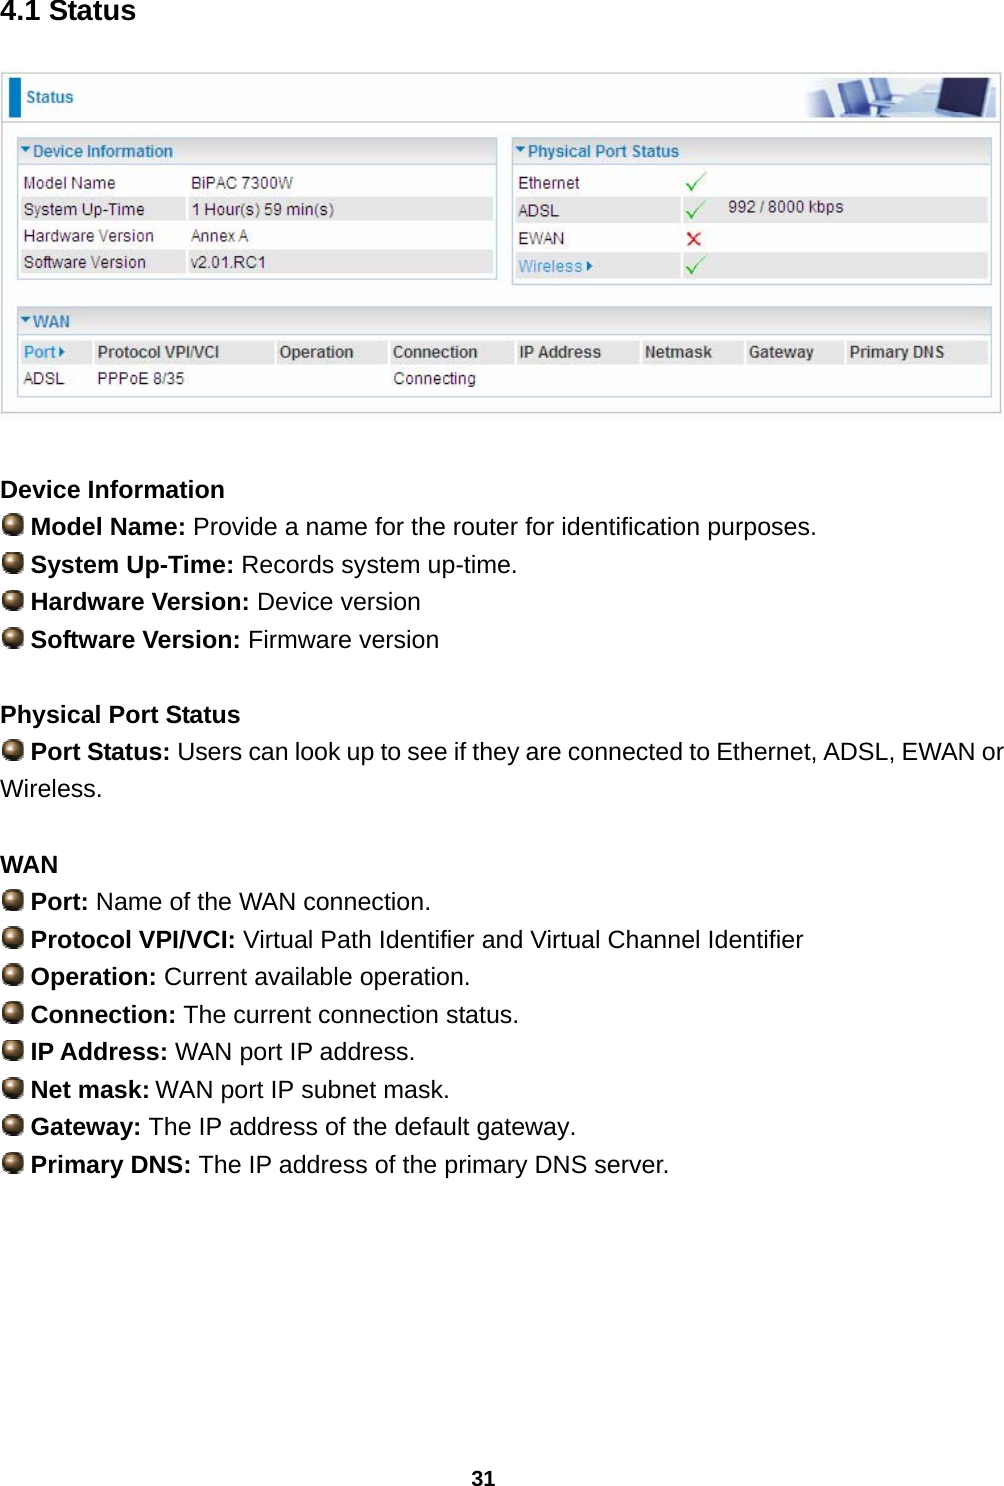 31 4.1 Status   Device Information  Model Name: Provide a name for the router for identification purposes.  System Up-Time: Records system up-time.  Hardware Version: Device version  Software Version: Firmware version  Physical Port Status  Port Status: Users can look up to see if they are connected to Ethernet, ADSL, EWAN or Wireless.  WAN  Port: Name of the WAN connection.  Protocol VPI/VCI: Virtual Path Identifier and Virtual Channel Identifier  Operation: Current available operation.  Connection: The current connection status.  IP Address: WAN port IP address.  Net mask: WAN port IP subnet mask.  Gateway: The IP address of the default gateway.  Primary DNS: The IP address of the primary DNS server.     